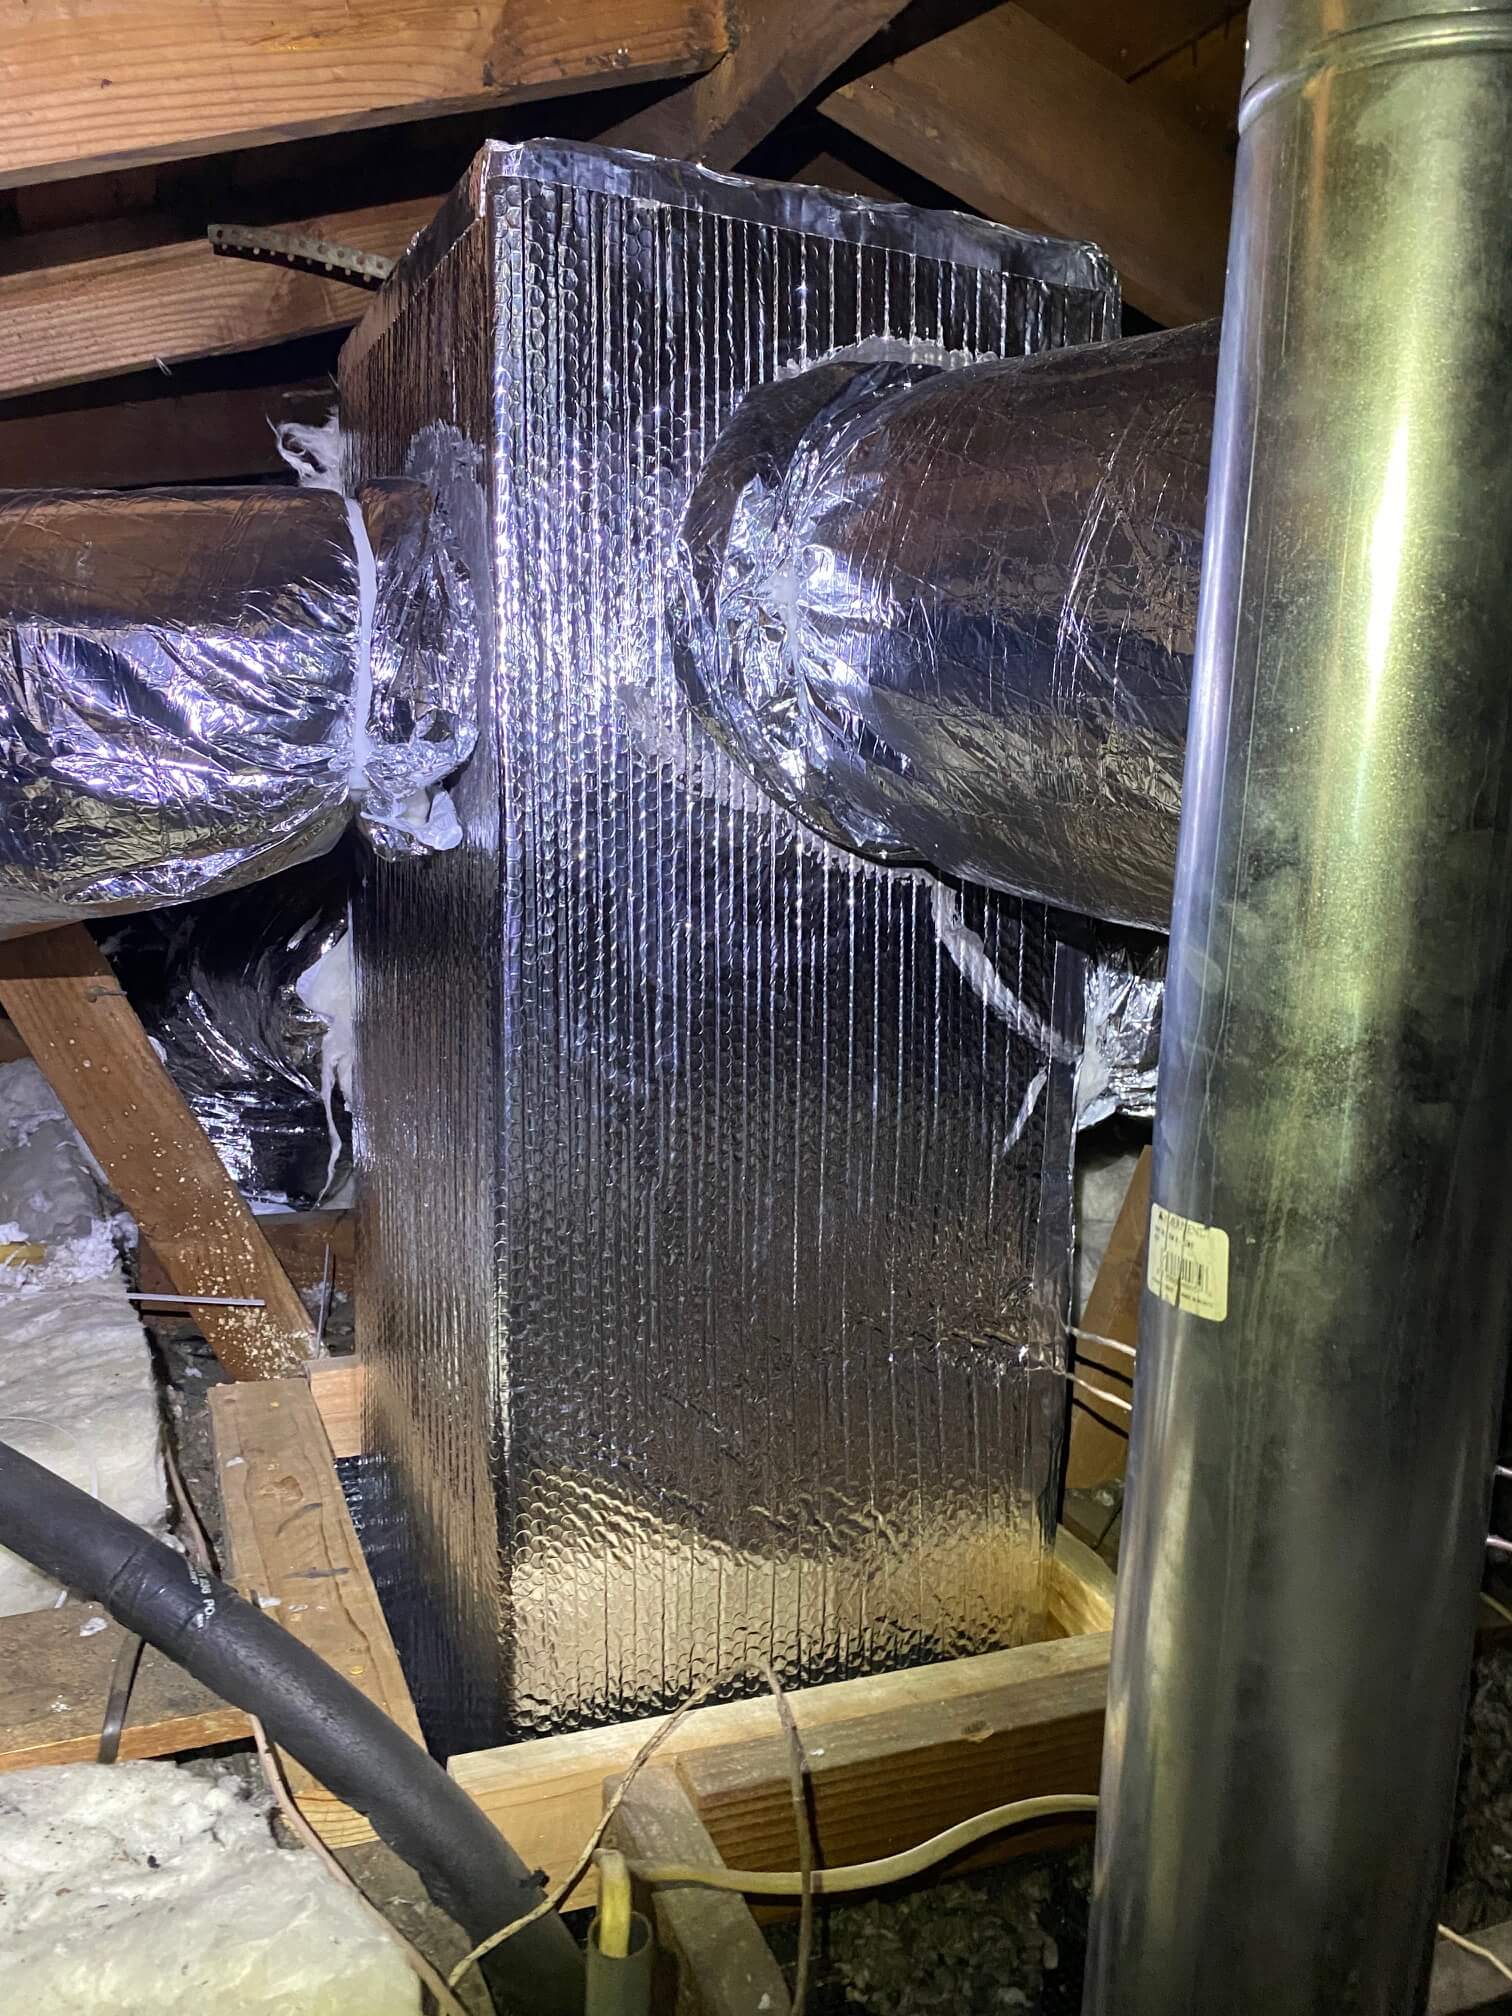 New Ducts in Attic